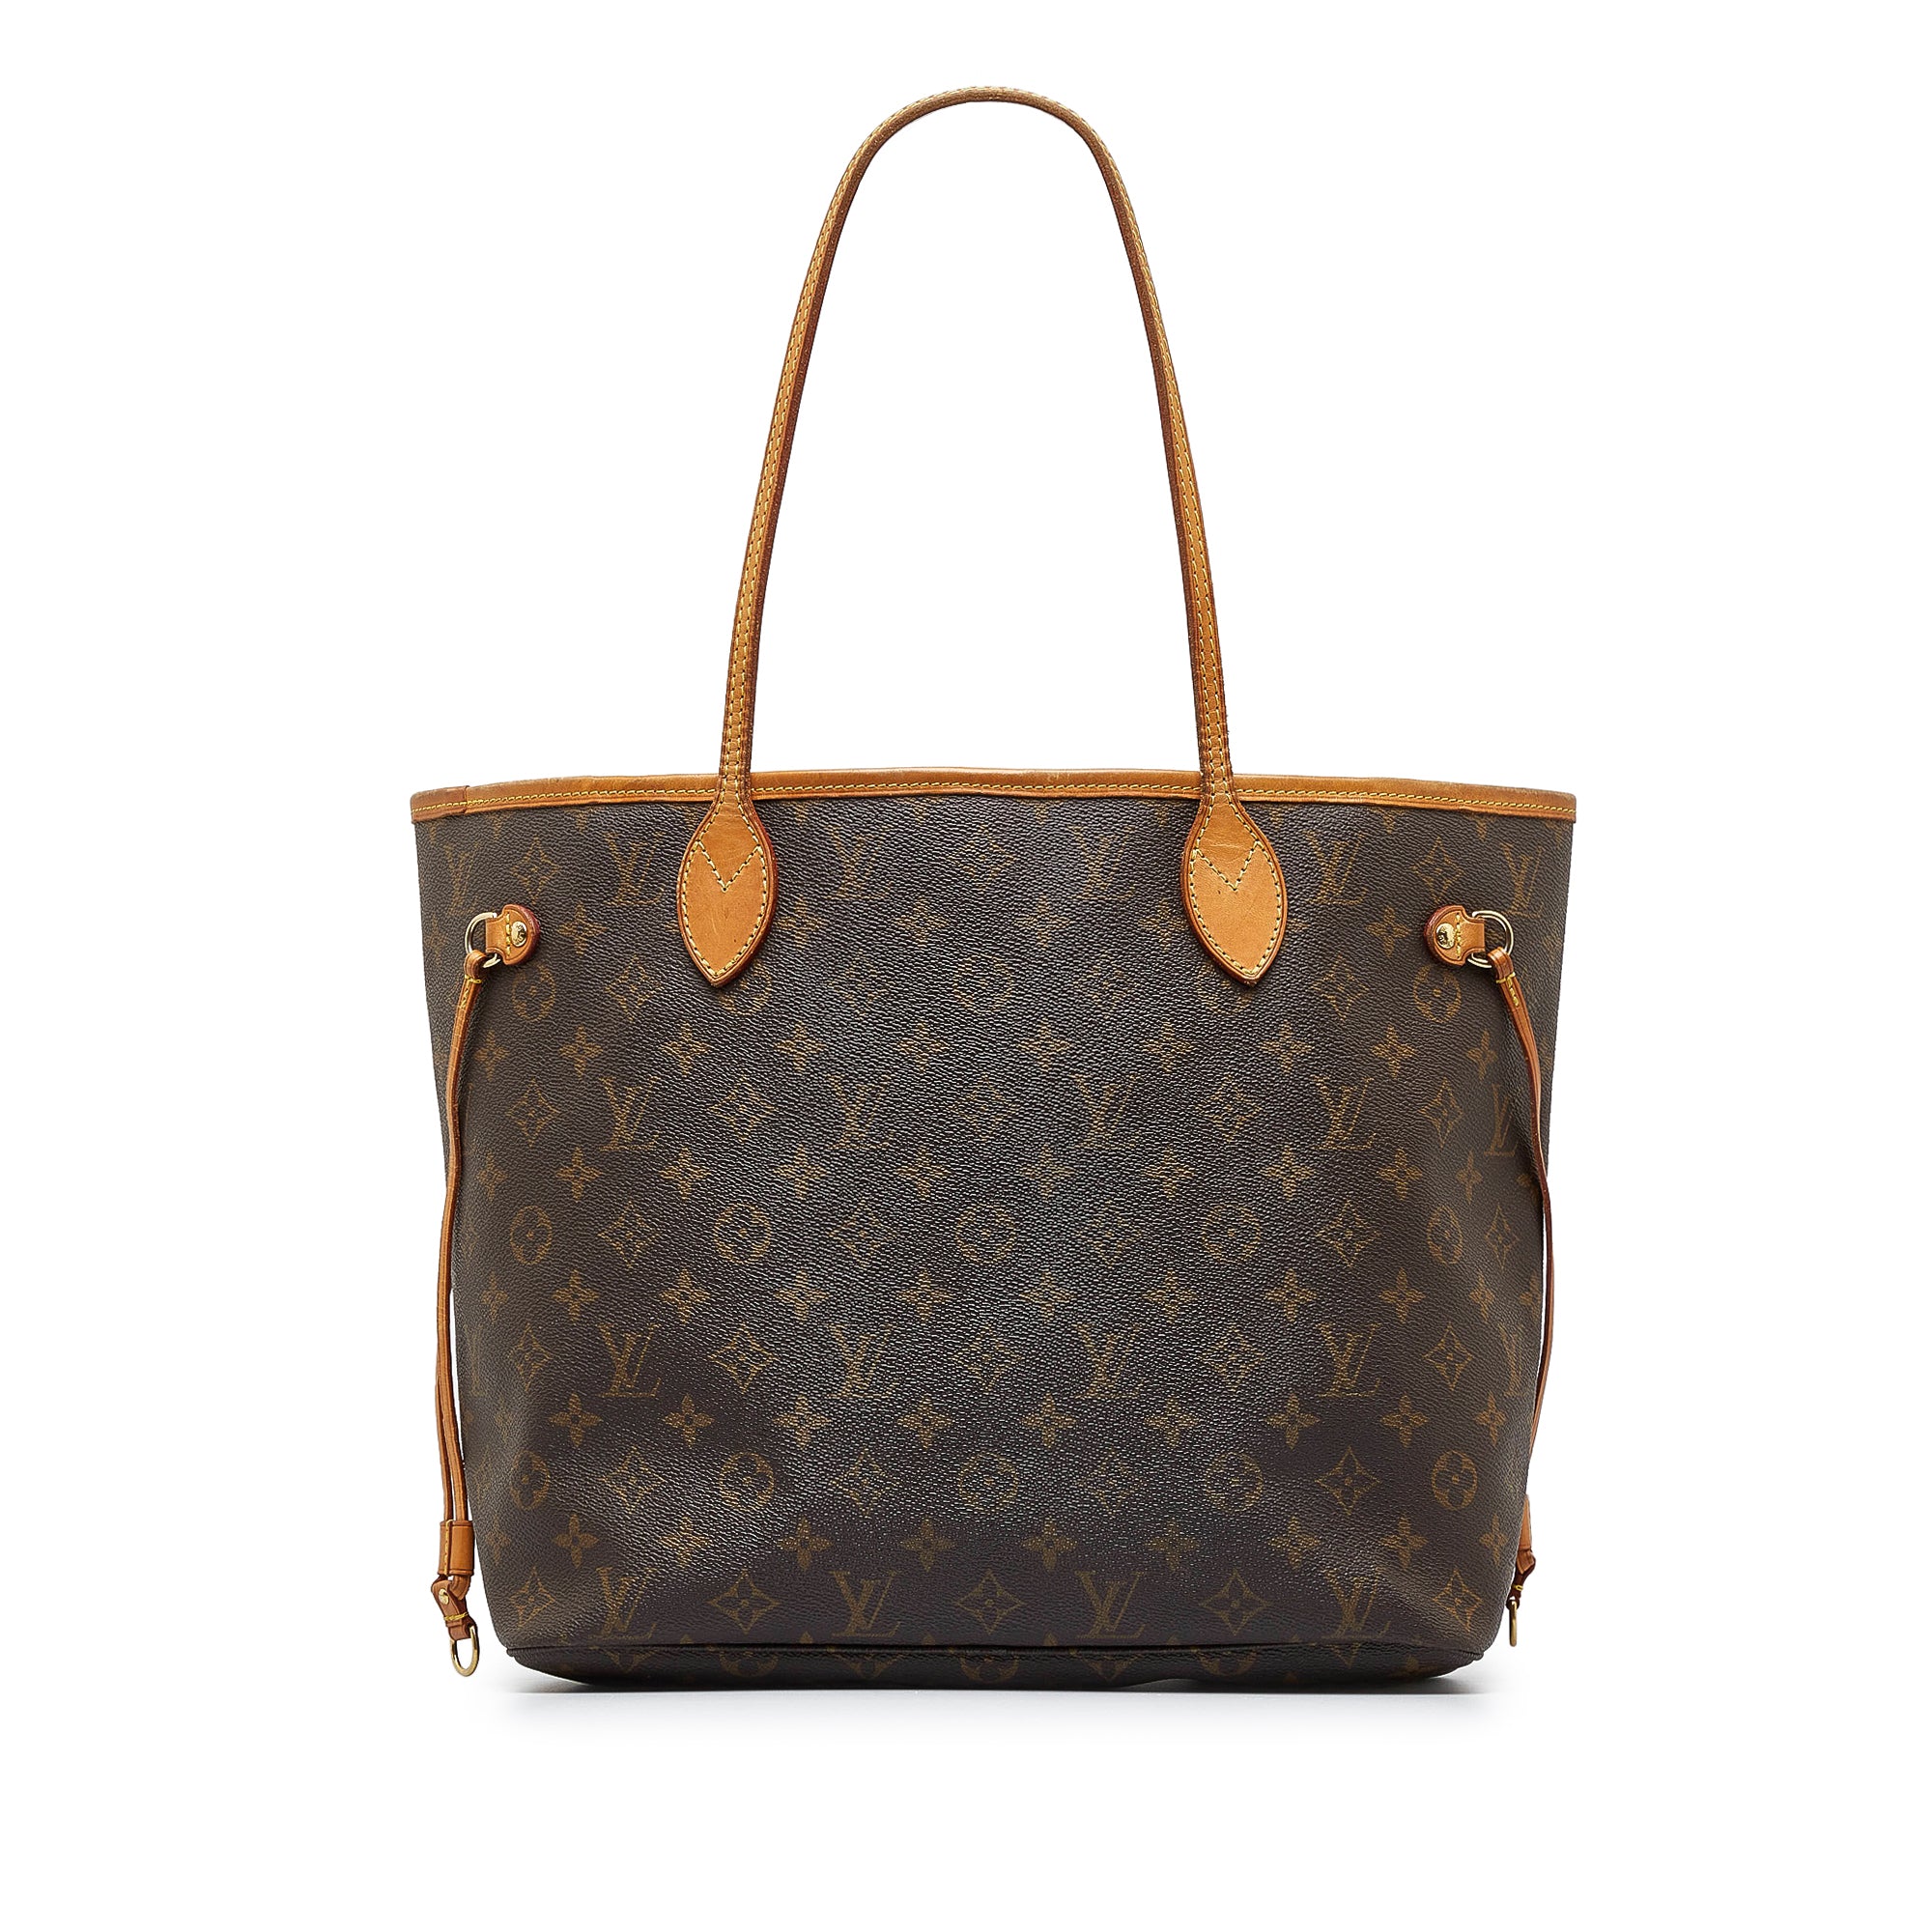 Louis Vuitton - Authenticated Neverfull Clutch Bag - Leather Brown Plain for Women, Never Worn, with Tag